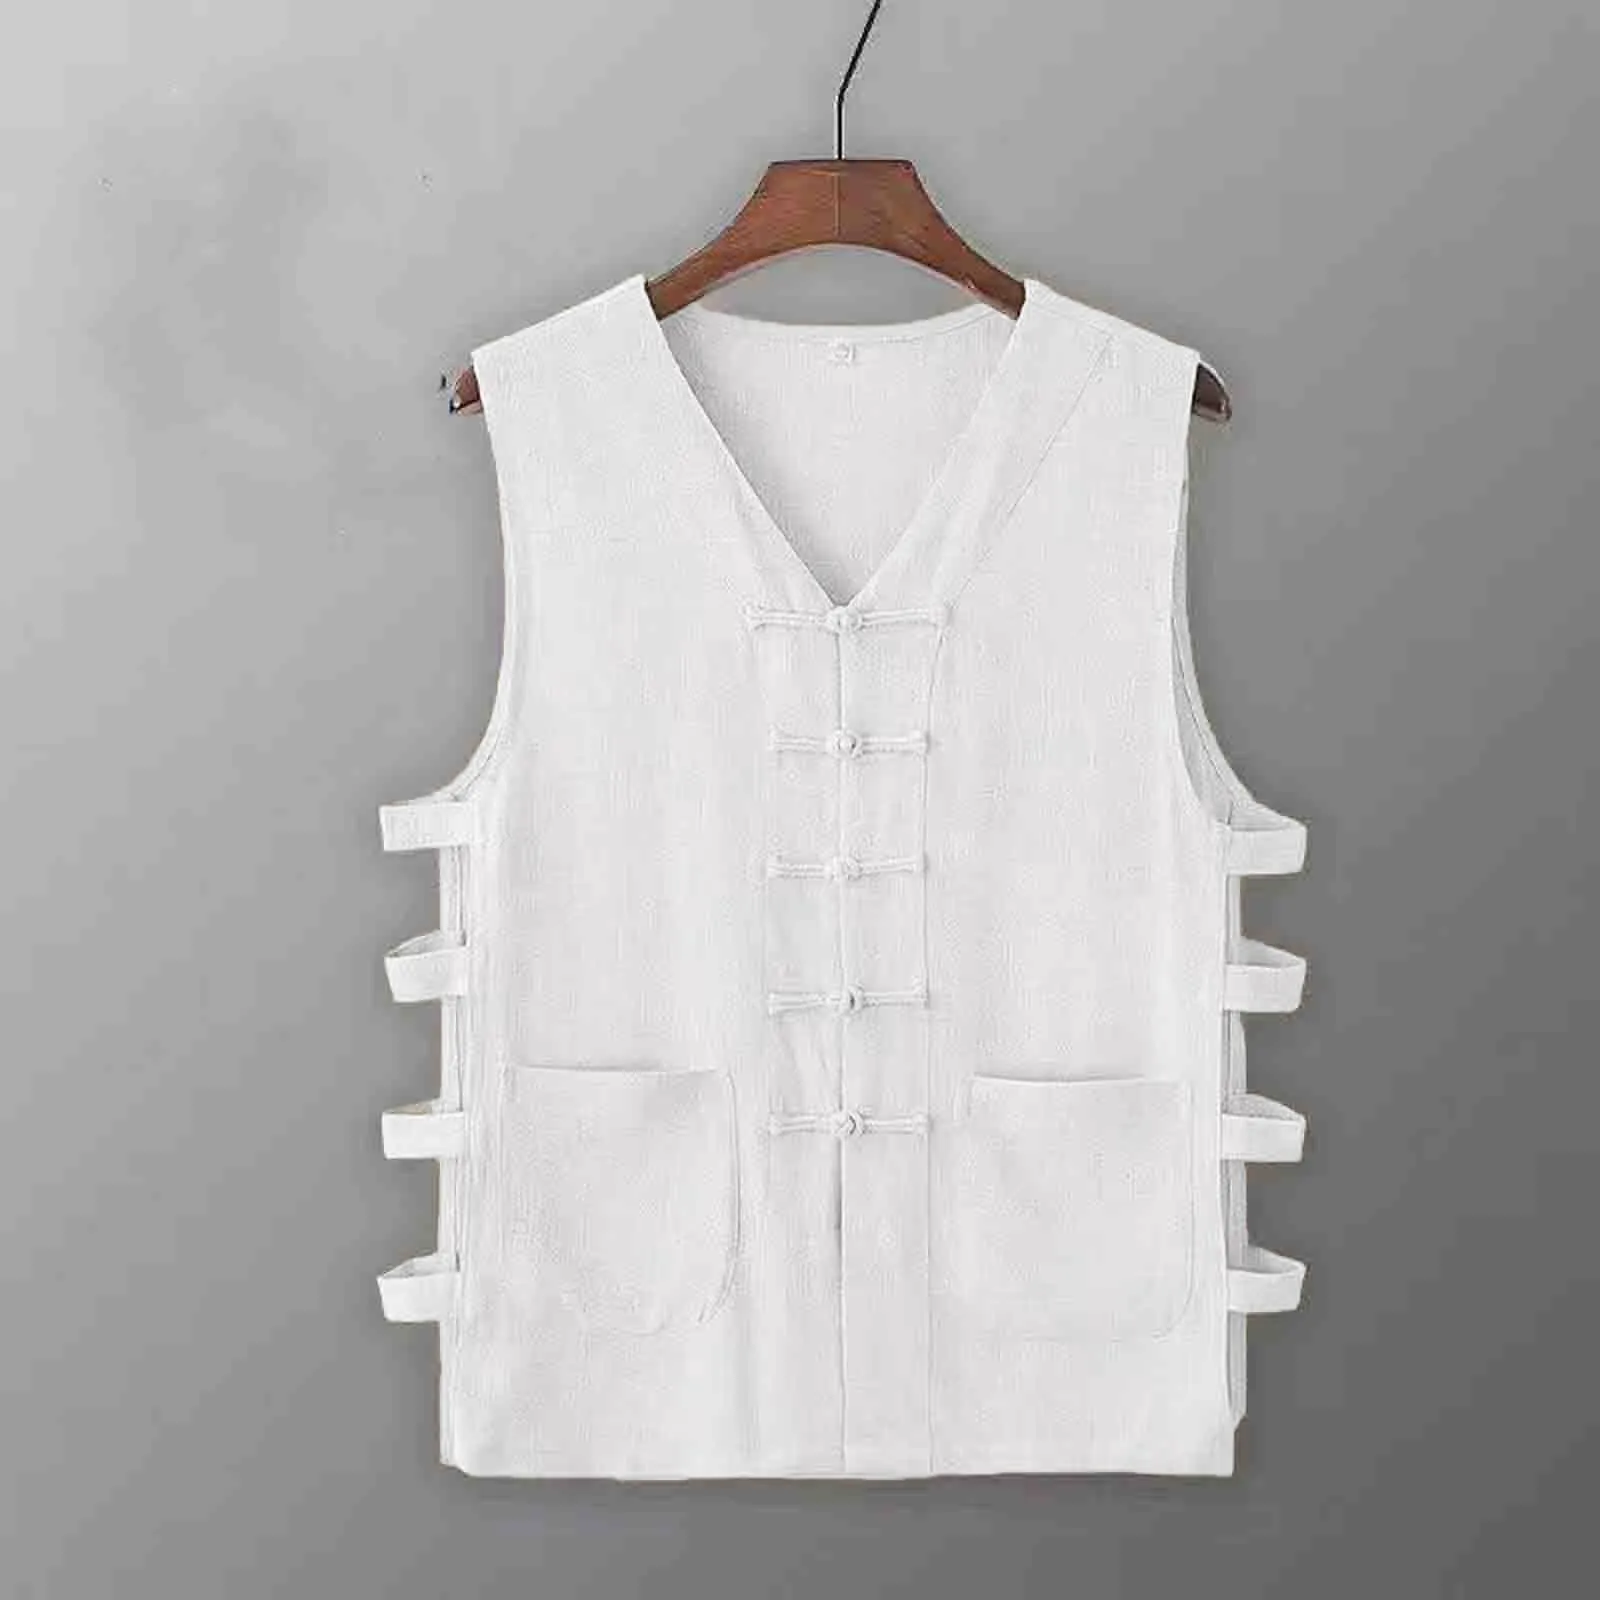 Vintage Vest Men Cotton Linen Shirt Kung Fu Vest Summer Tank Top Tang Suit Traditional Chinese Clothing Sleeveless Open Cardigan